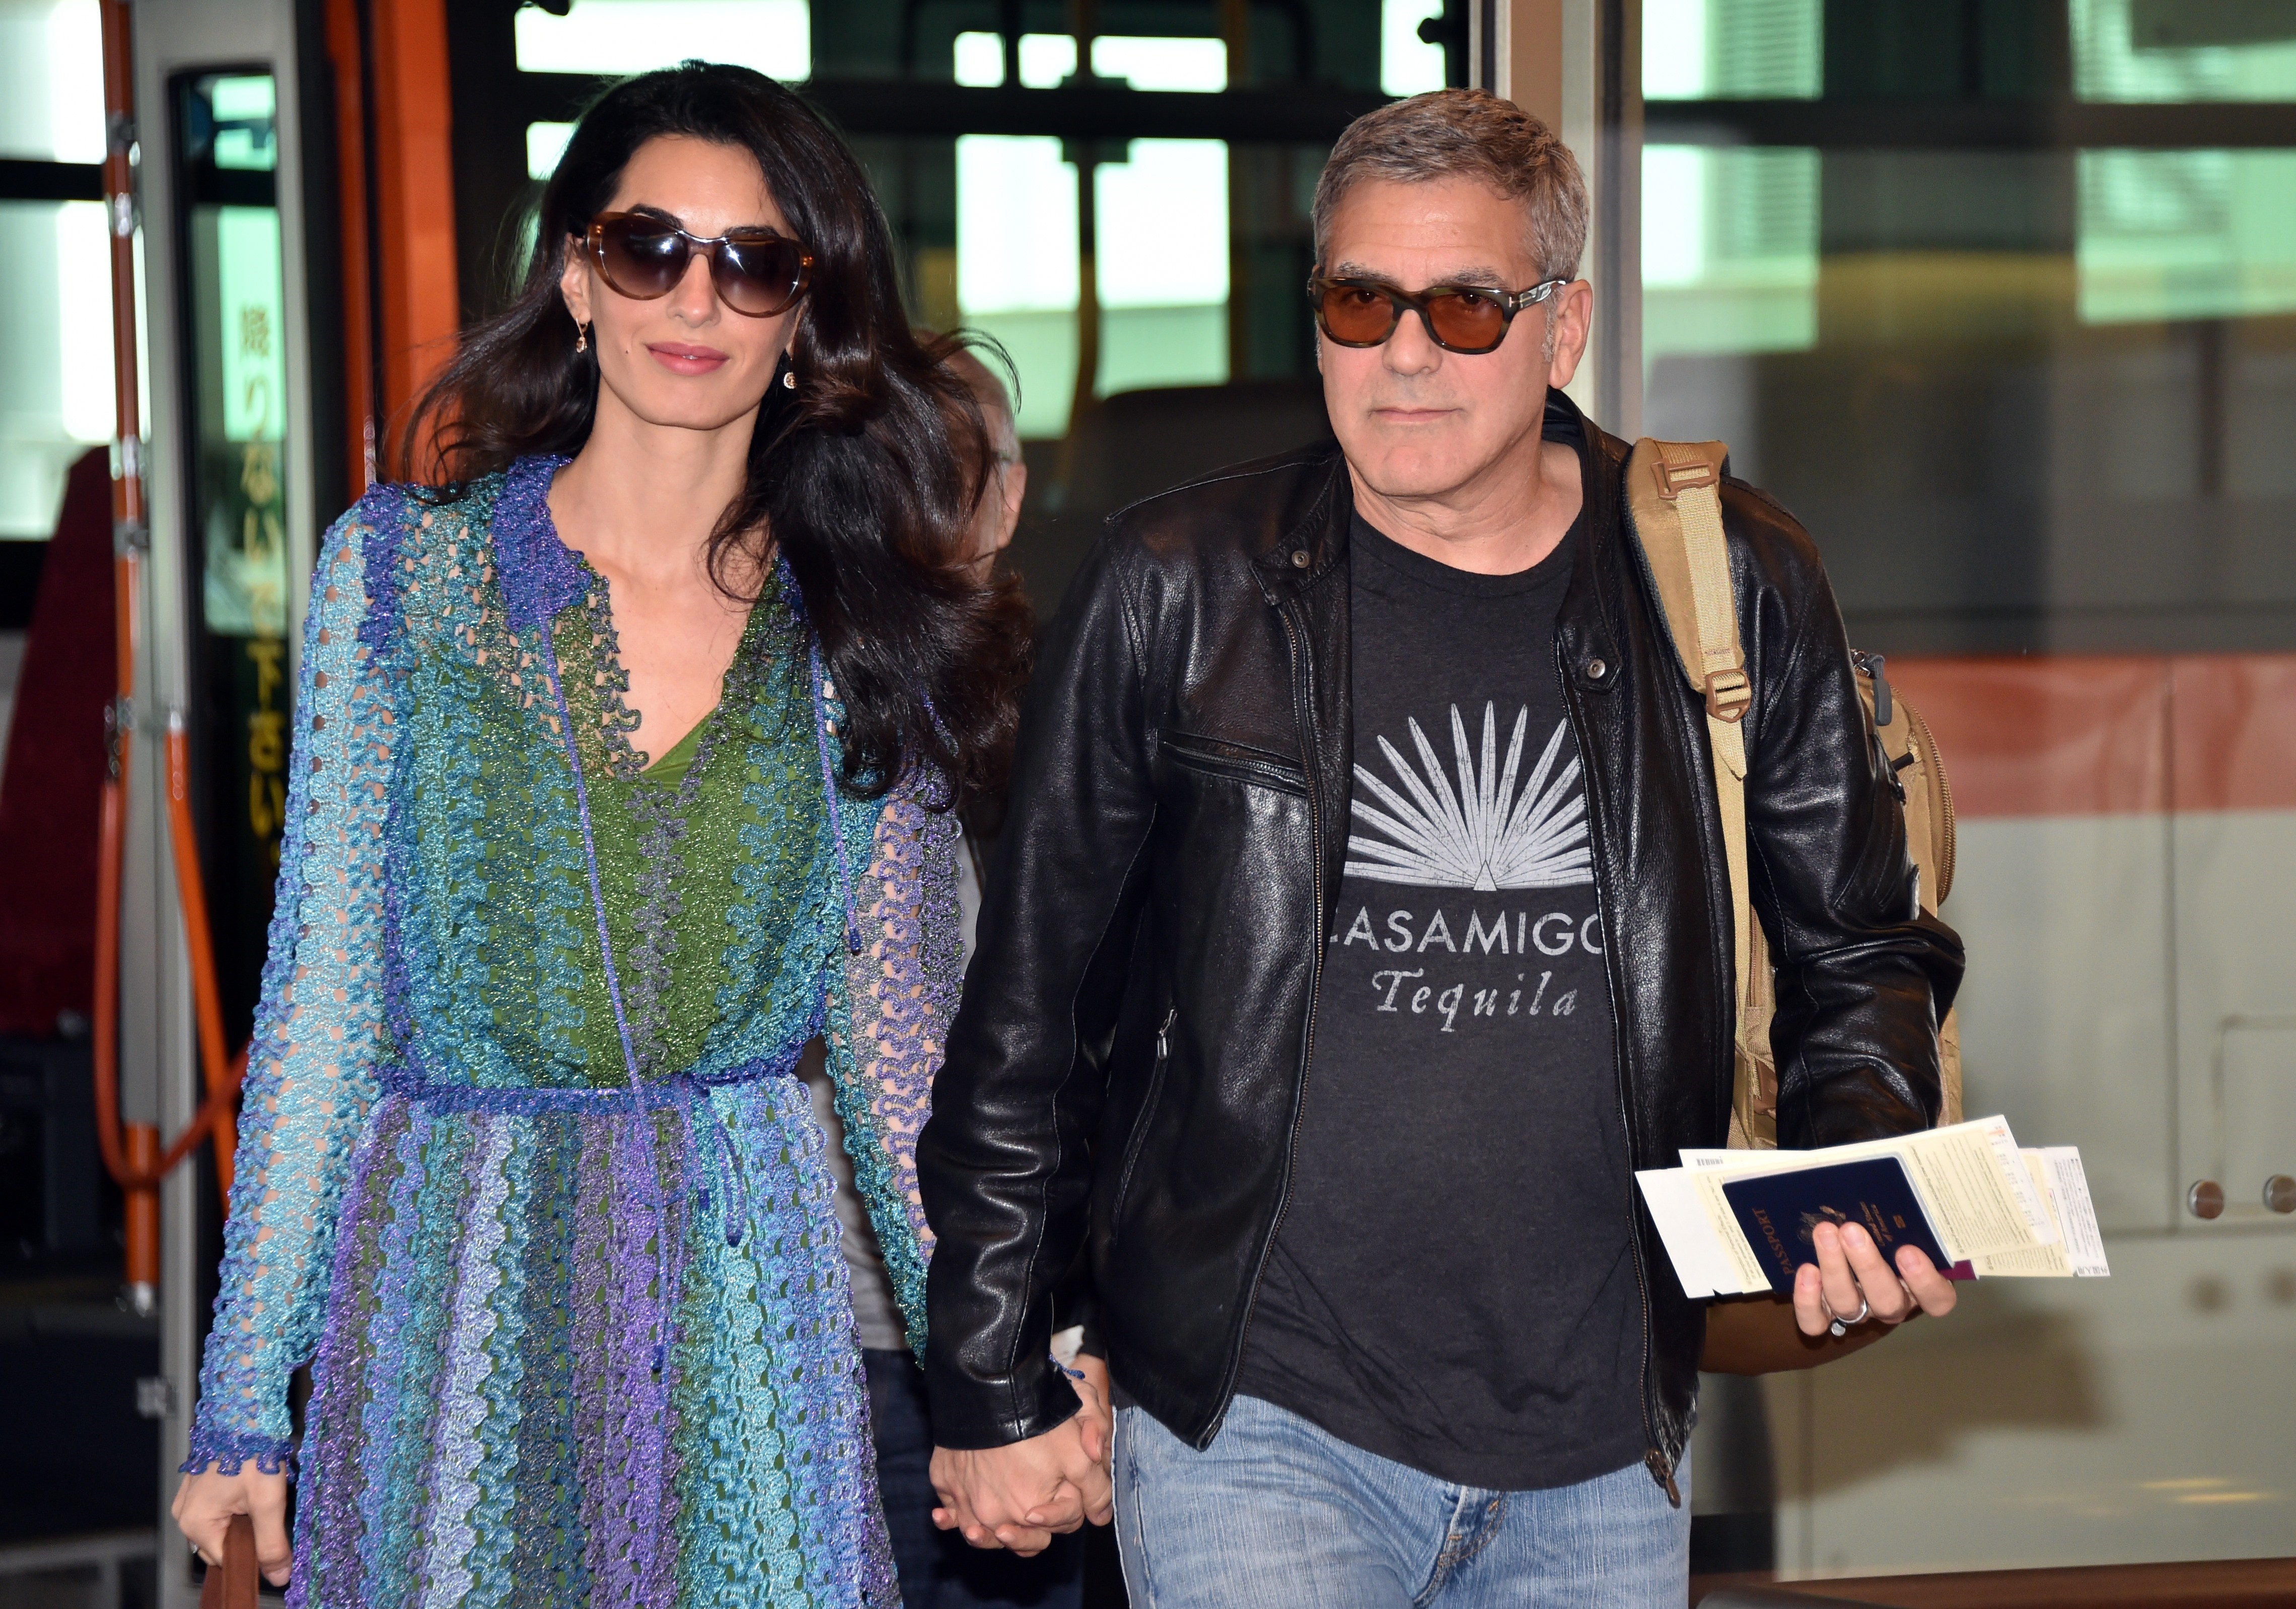 George Clooney (R), accompanied by his wife Amal (L), arrives at Haneda airport in Tokyo on May 24, 2015. | Source: Getty Images